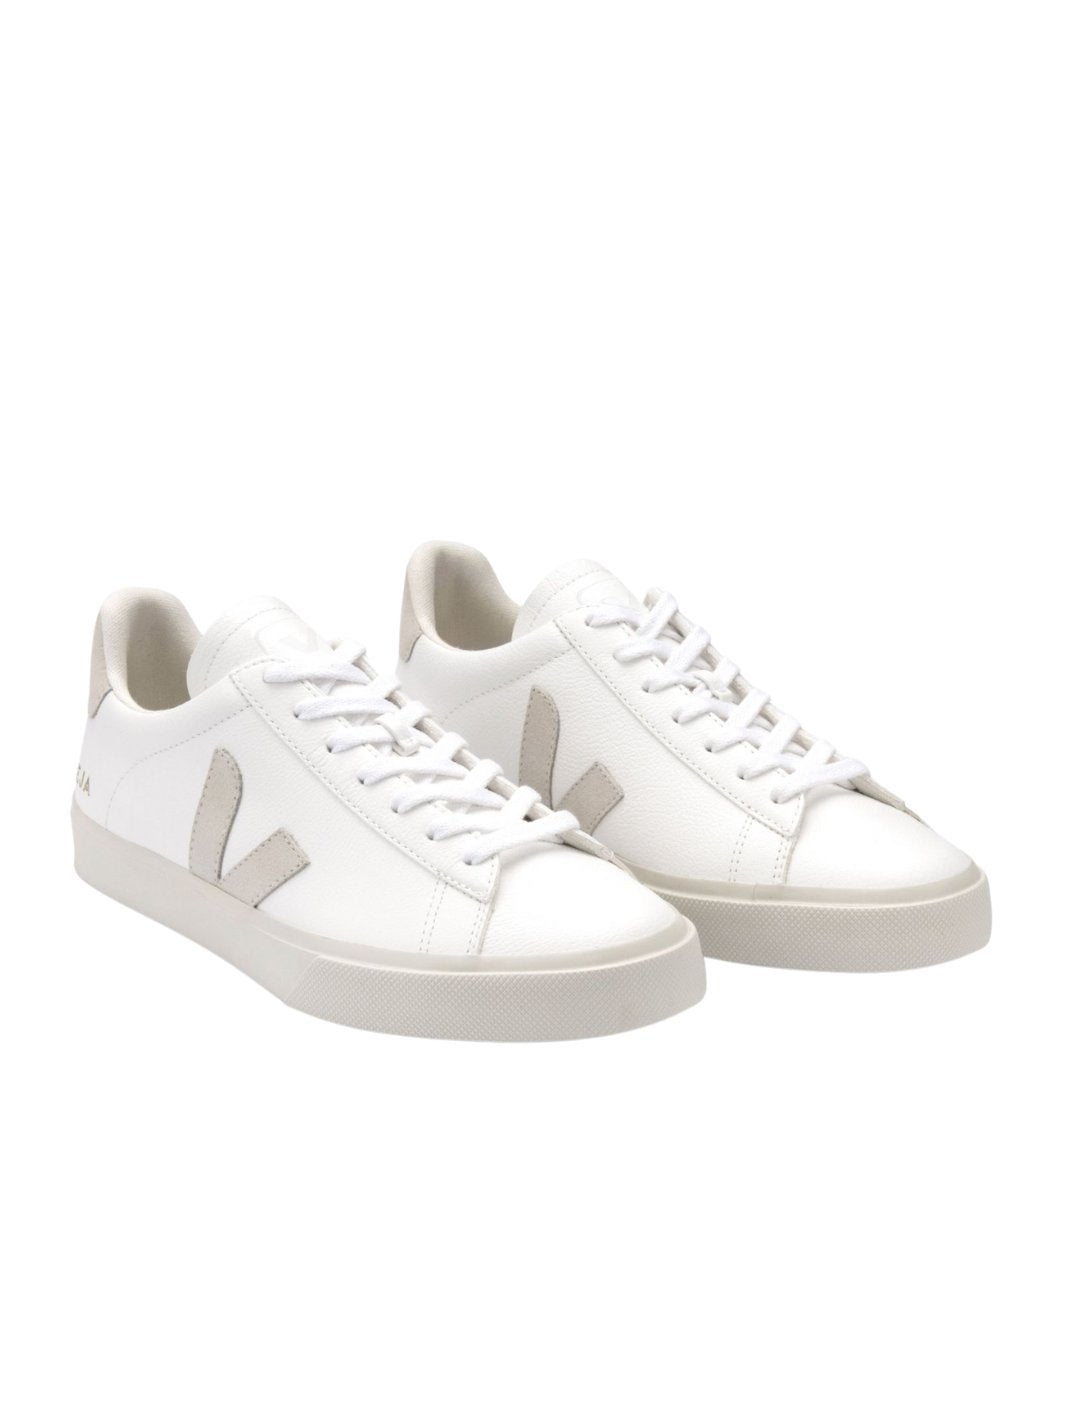 Veja Shoes Sneakers | Campo Chromefree White Natural Suede